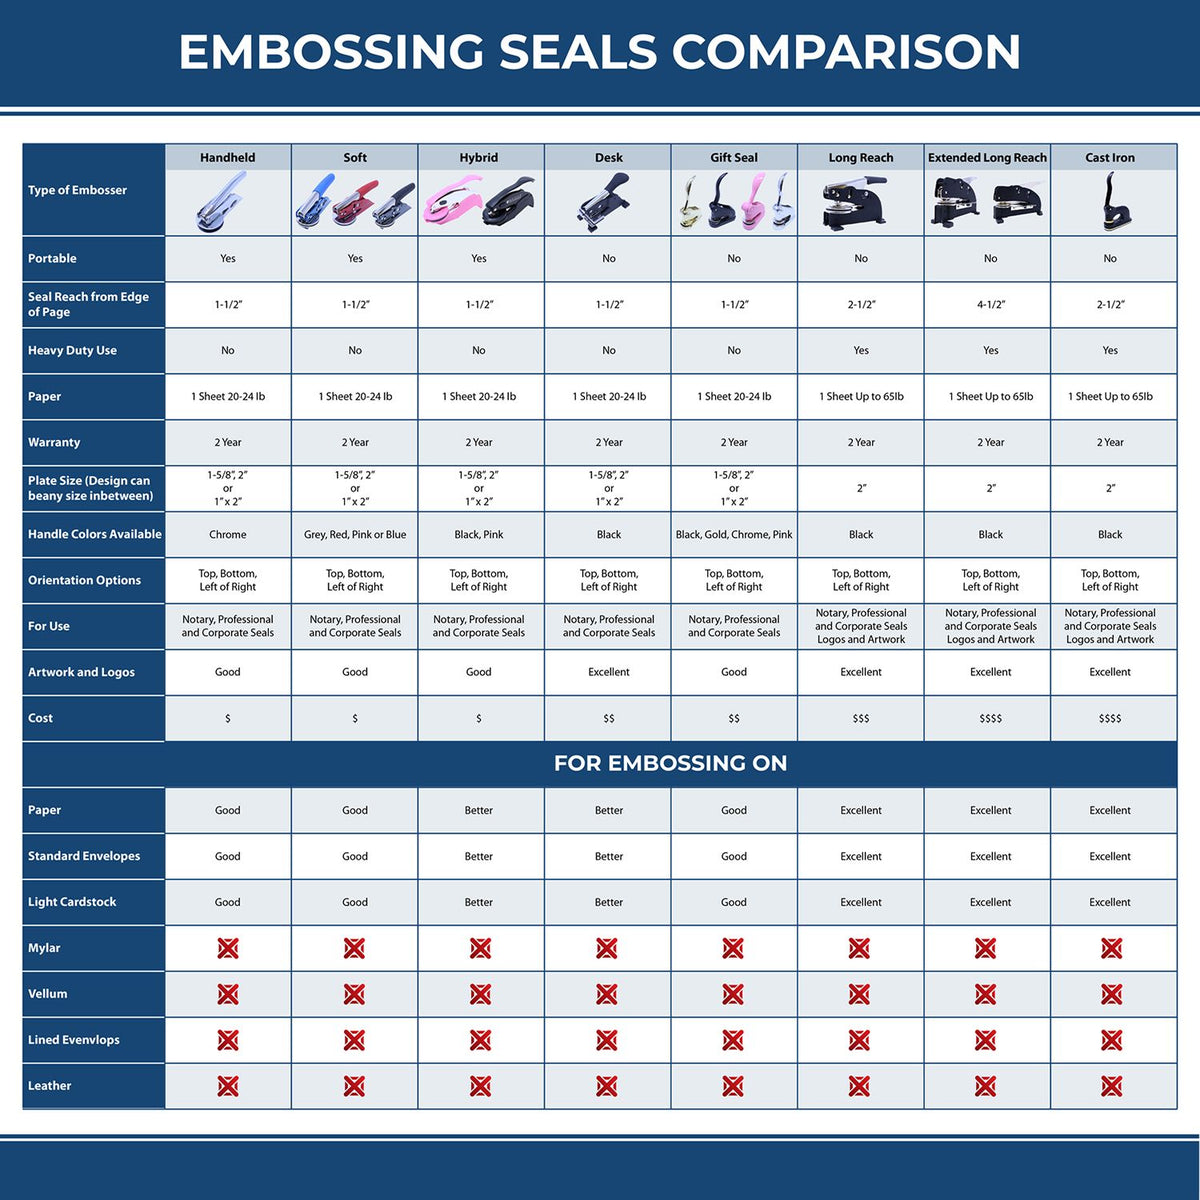 A comparison chart for the different types of mount models available for the State of Connecticut Soft Land Surveyor Embossing Seal.